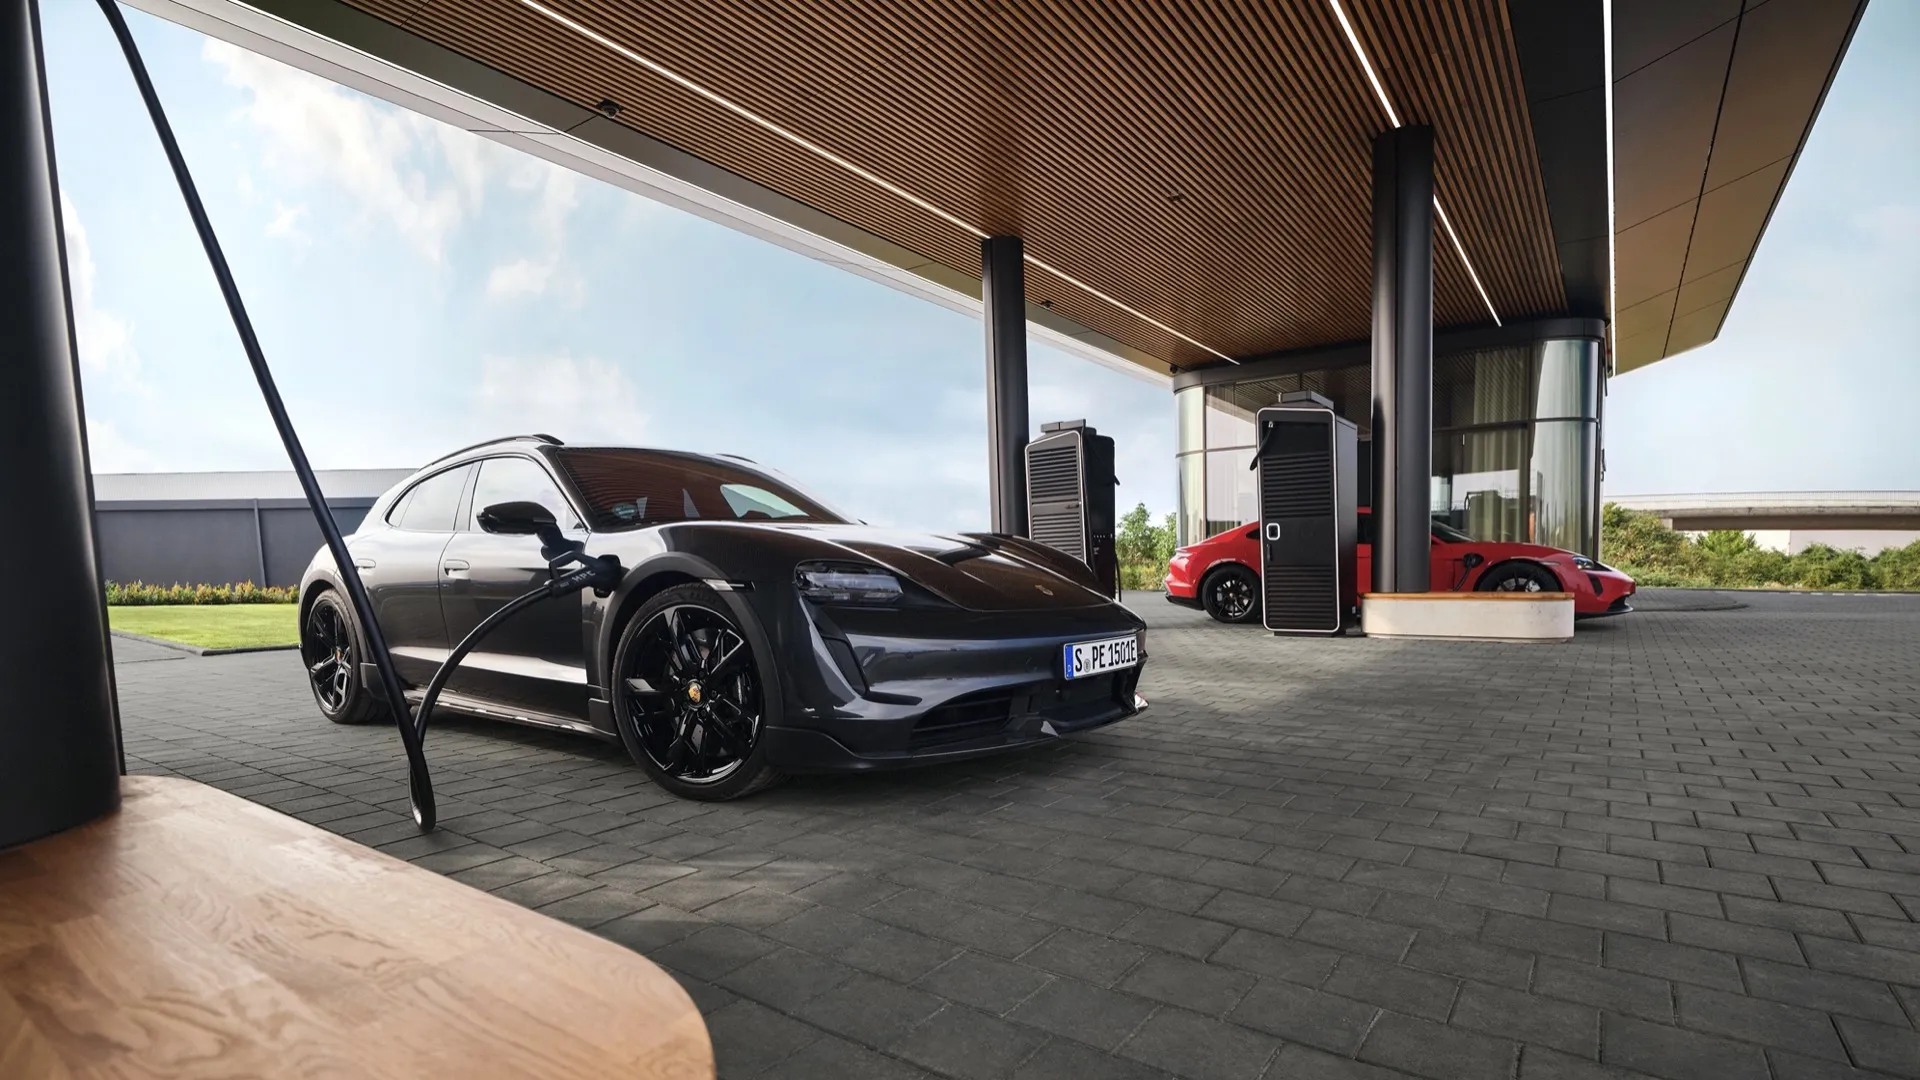 Porsche is ramping up effort to build the all-electric Mission E